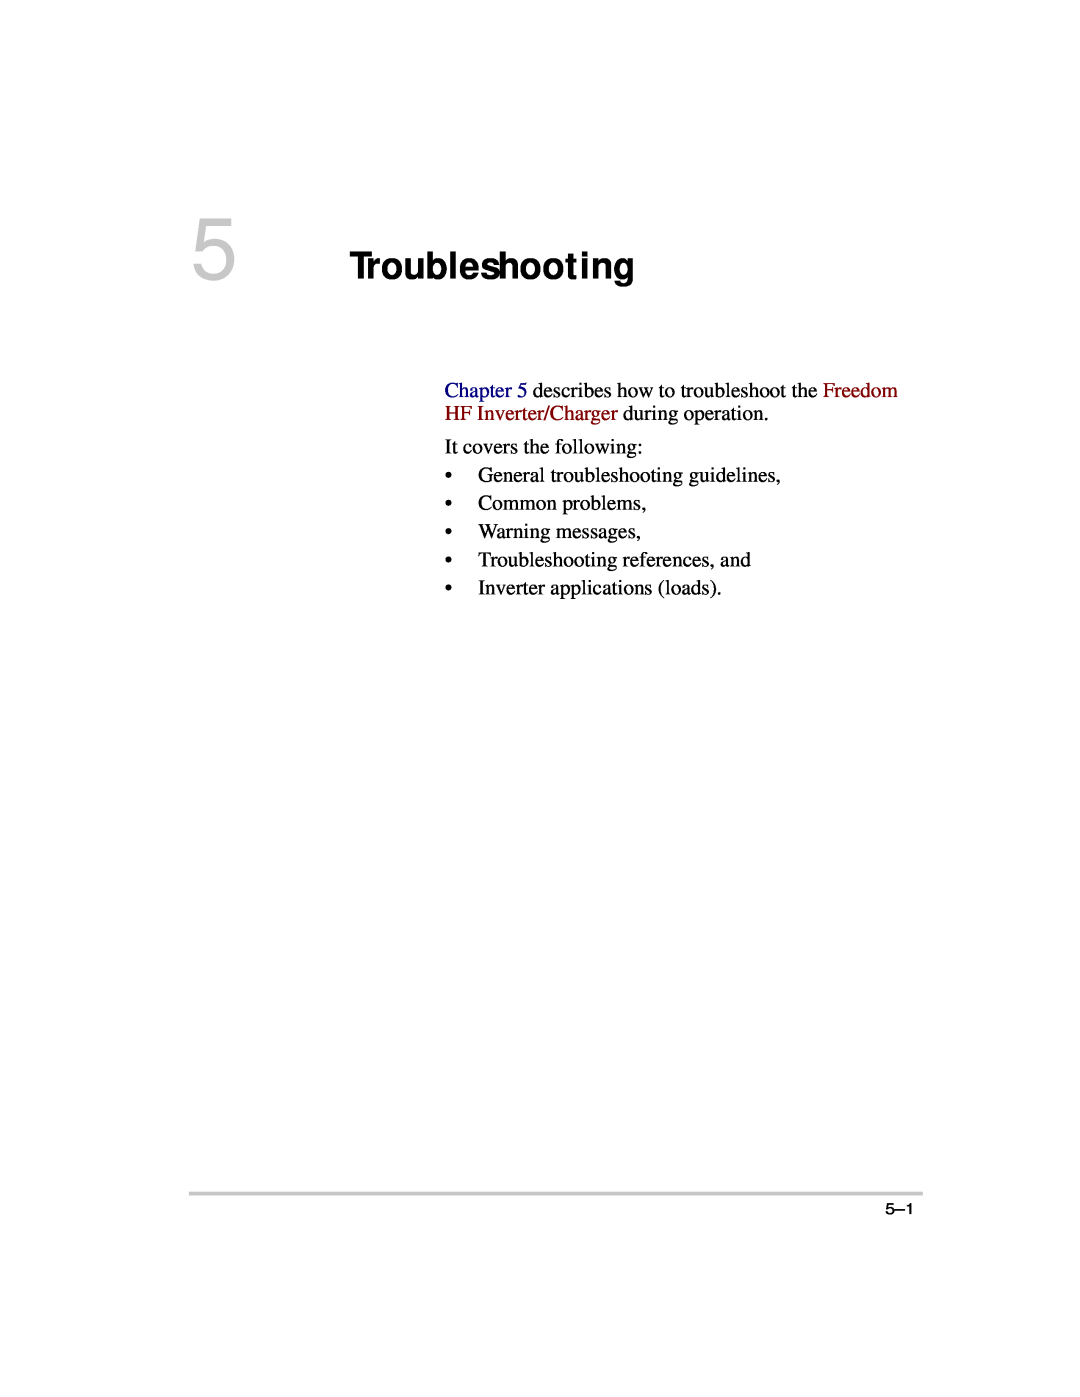 Xantrex Technology HF 1800 manual Troubleshooting, describes how to troubleshoot the Freedom, Inverter applications loads 